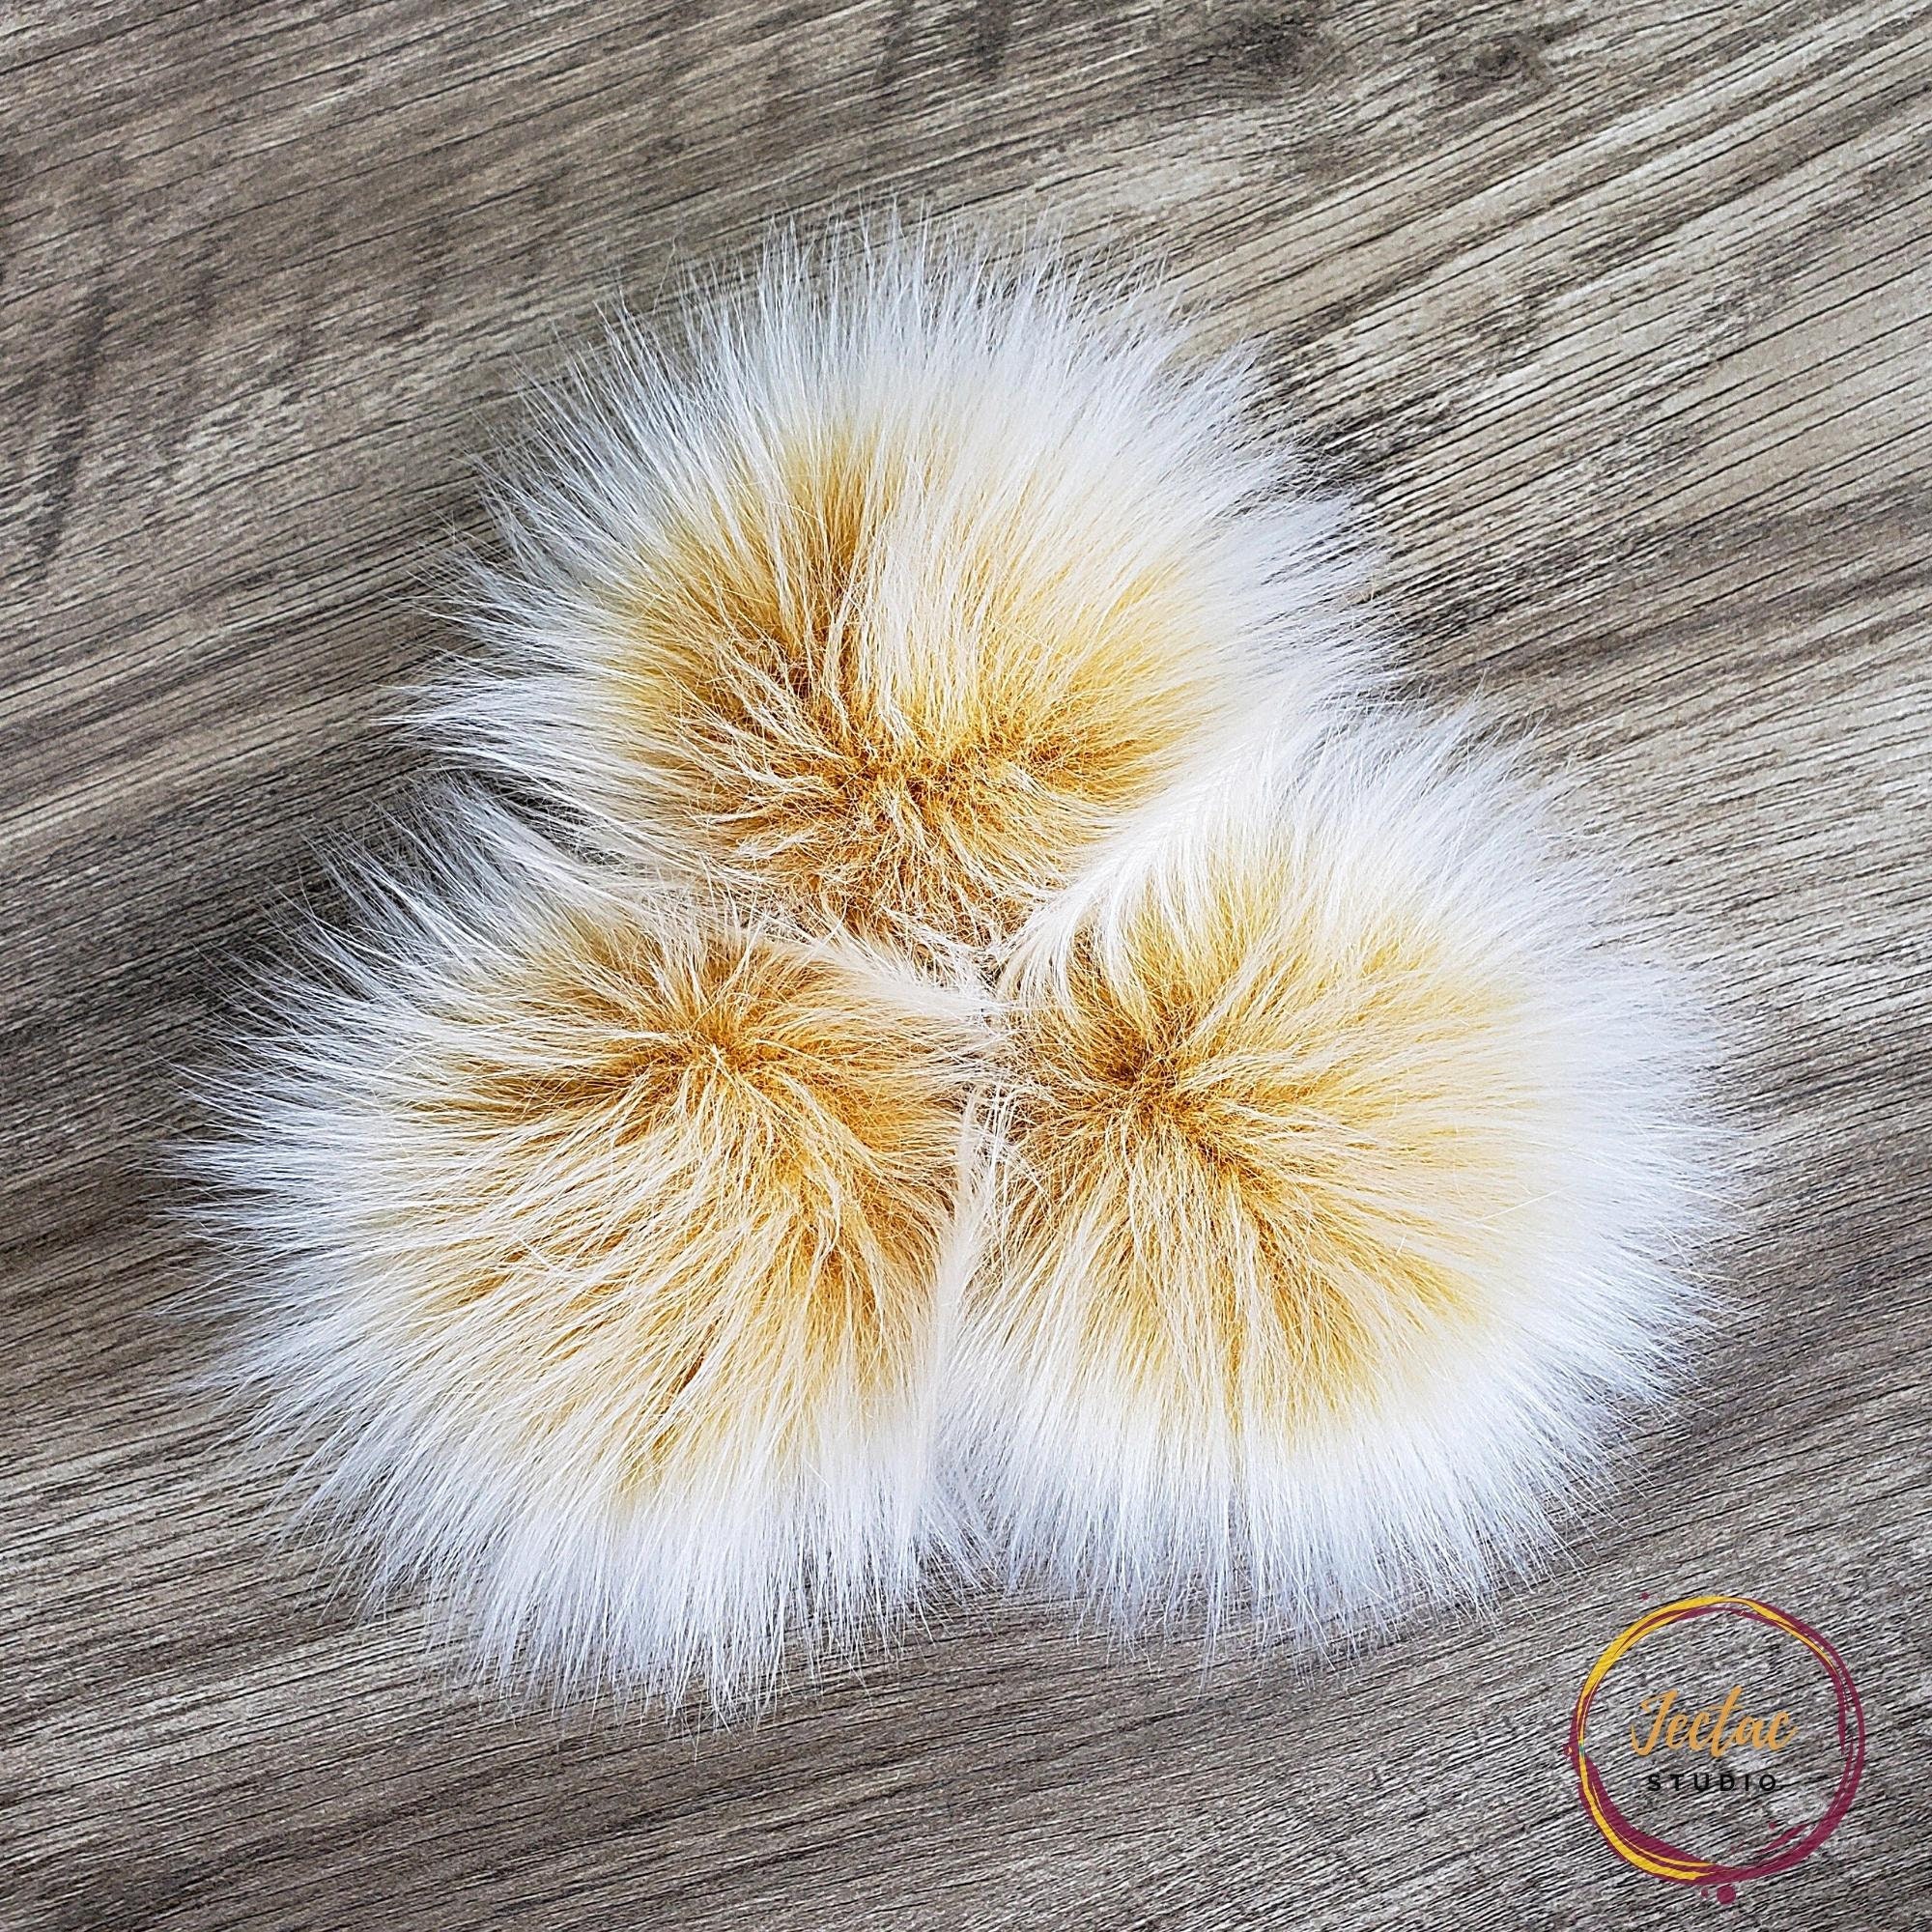 Custom Size Bright White Faux Fur Pom Poms for Crochet Crafts Hats and  Beanies Fluffy Solid White as Snow Pom With Button Snap, Ties or Loop 